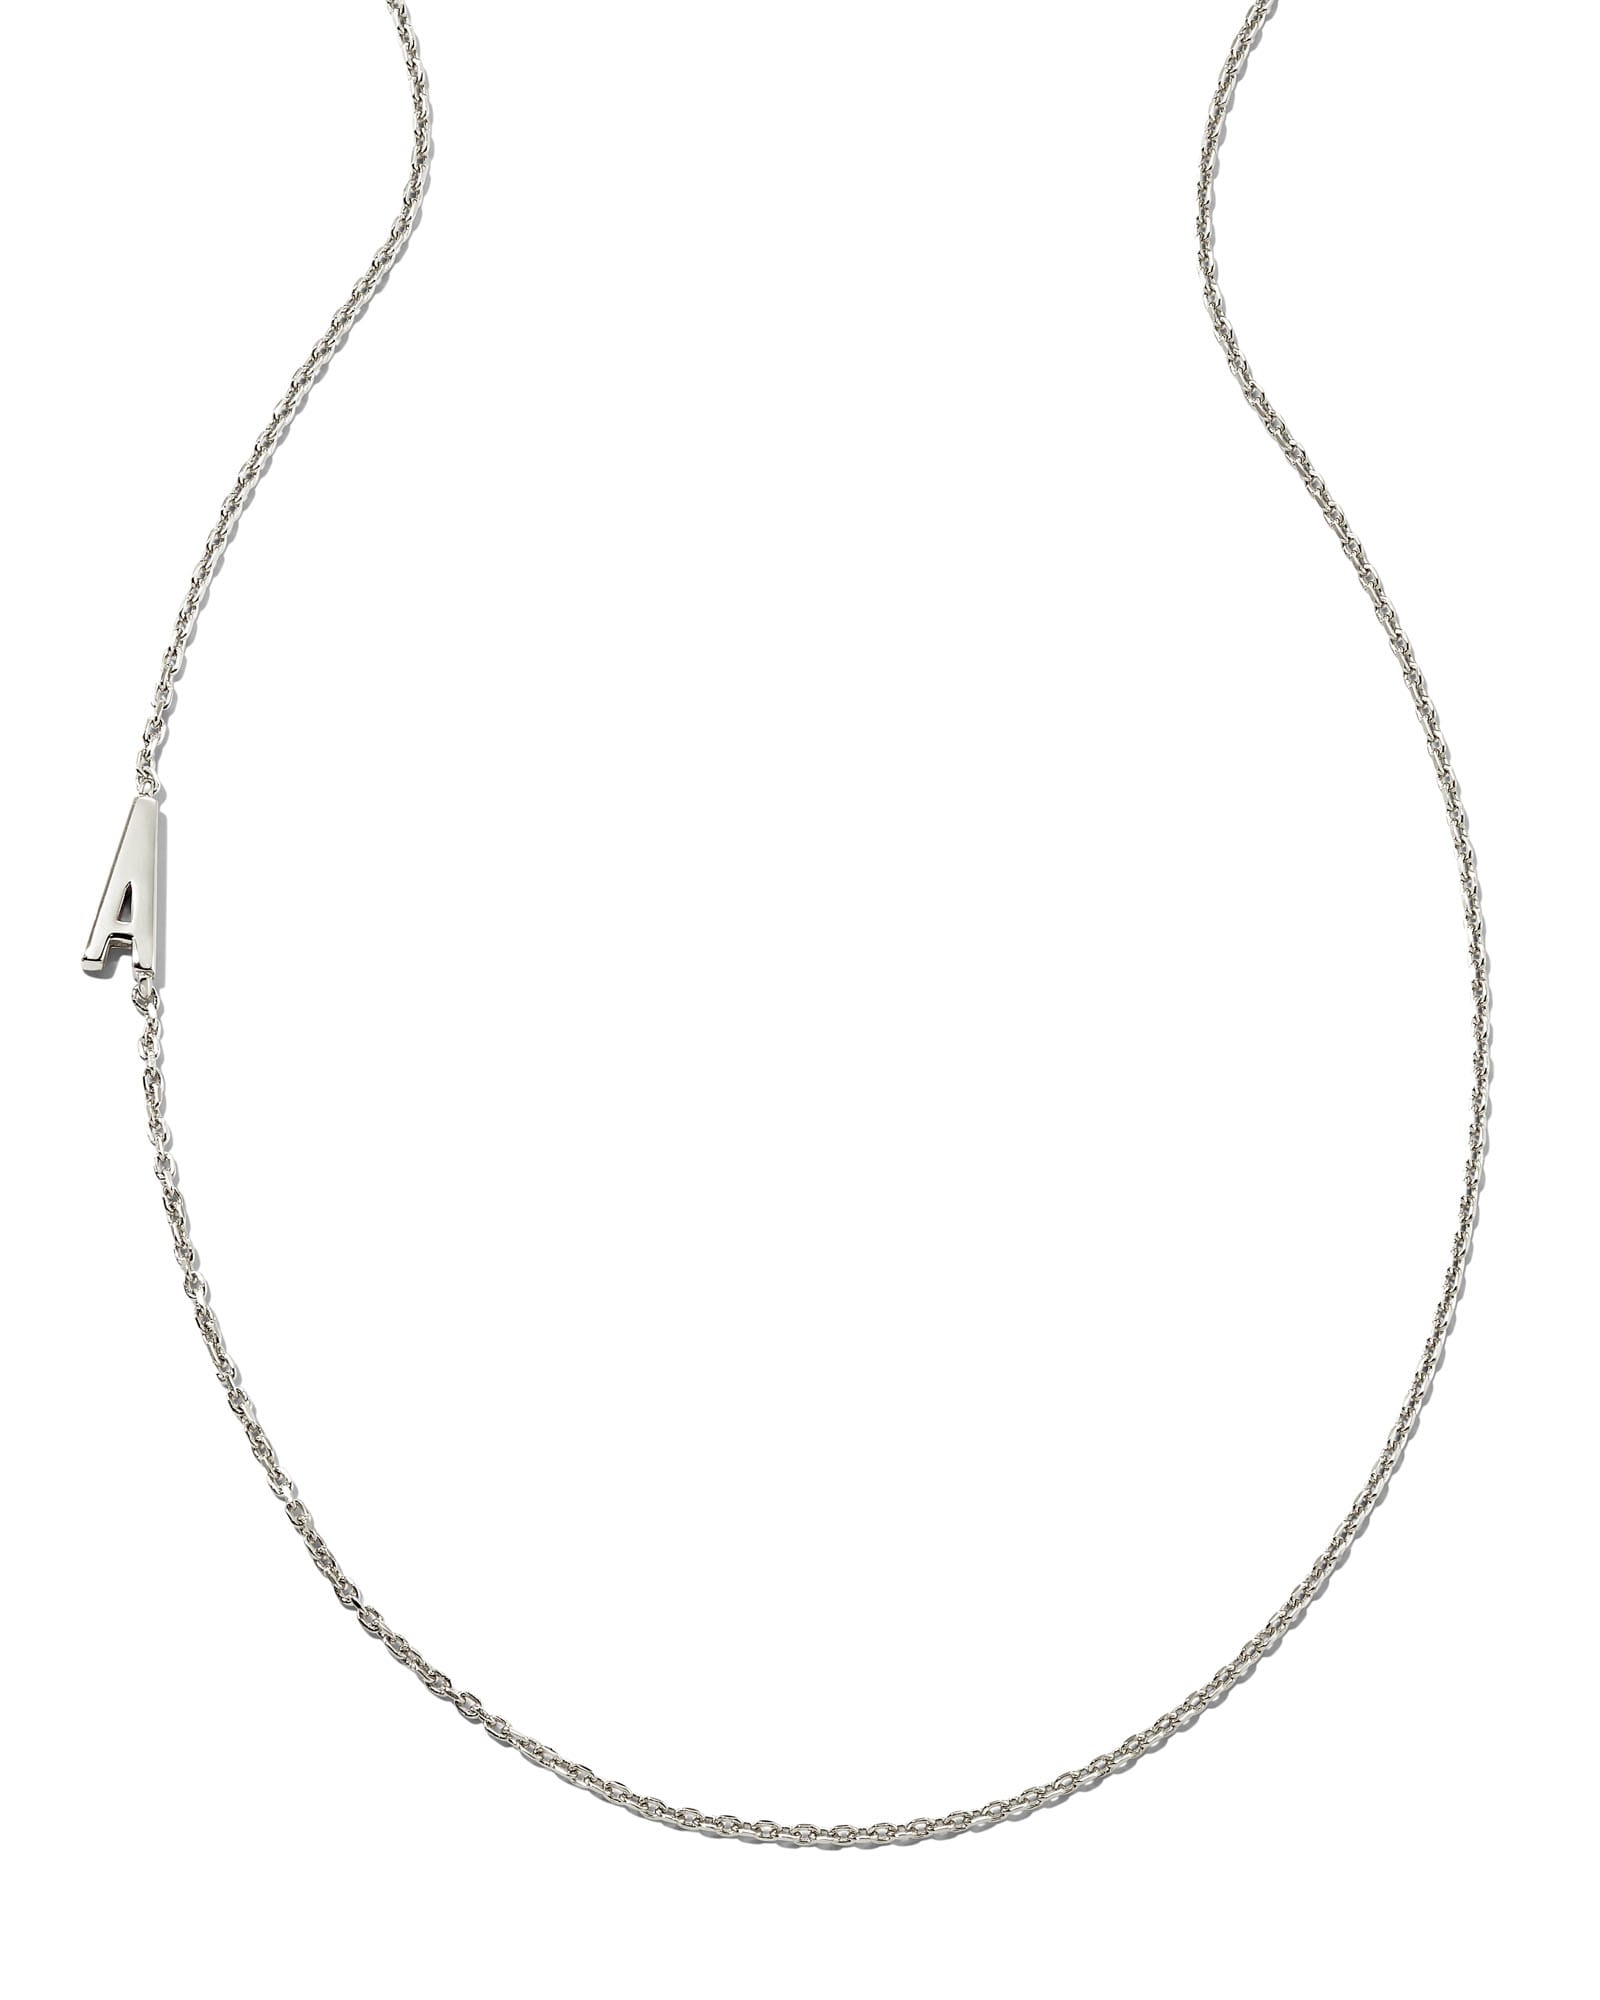 Necklace Extender 2 in Sterling Silver